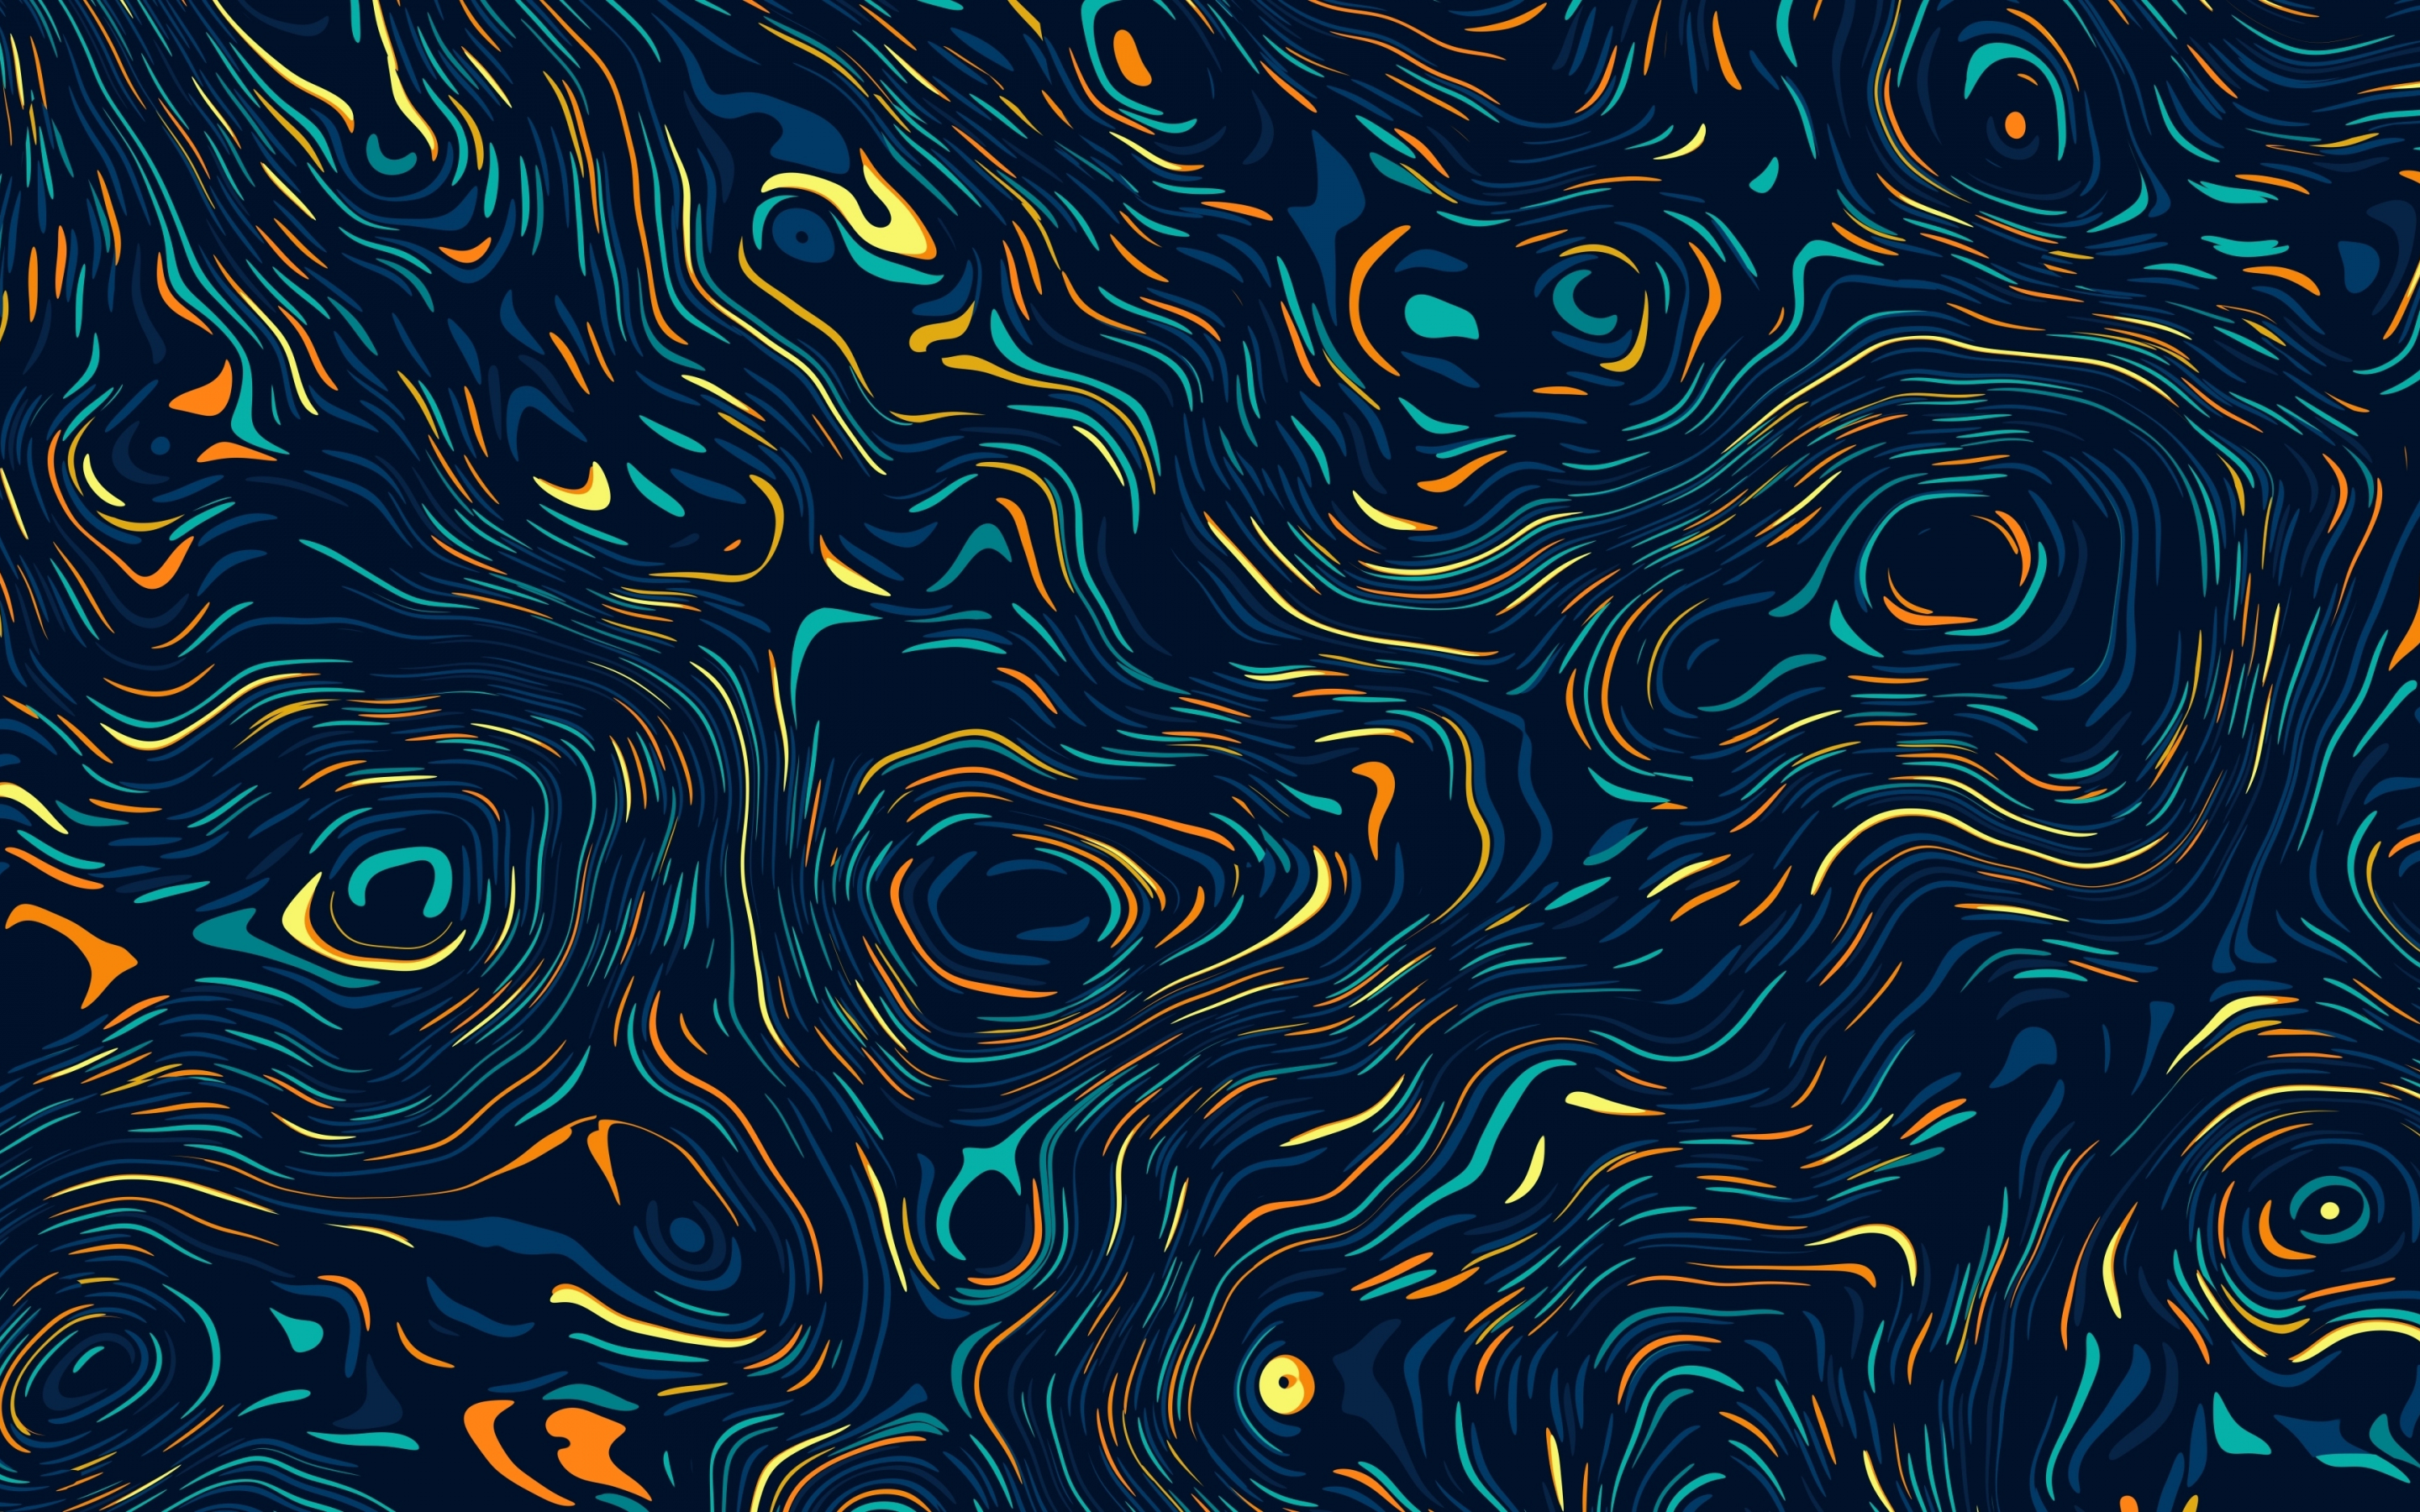 Download wallpaper 2880x1800 abstract colorful lines minimal mac pro  retaia 2880x1800 hd background 24578